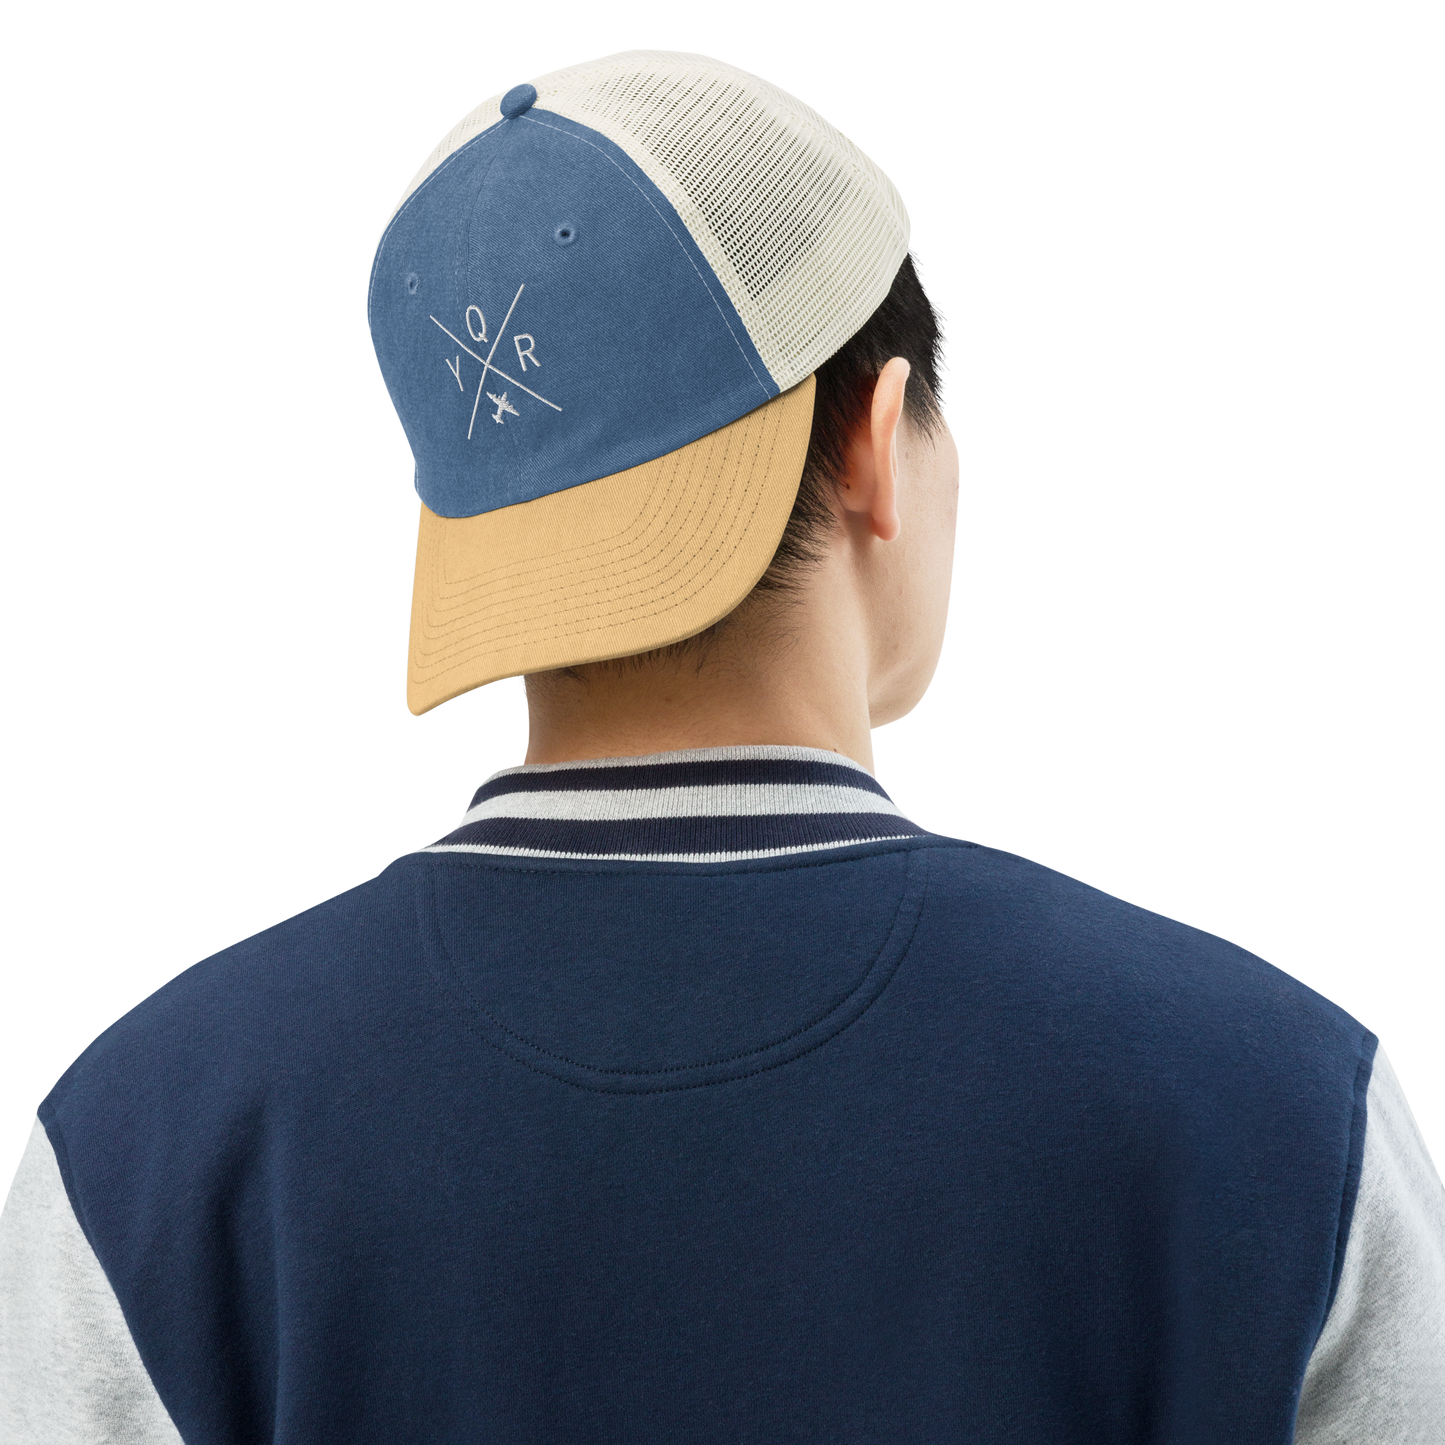 YHM Designs - YQR Regina Pigment-Dyed Trucker Cap - Crossed-X Design with Airport Code and Vintage Propliner - White Embroidery - Image 04